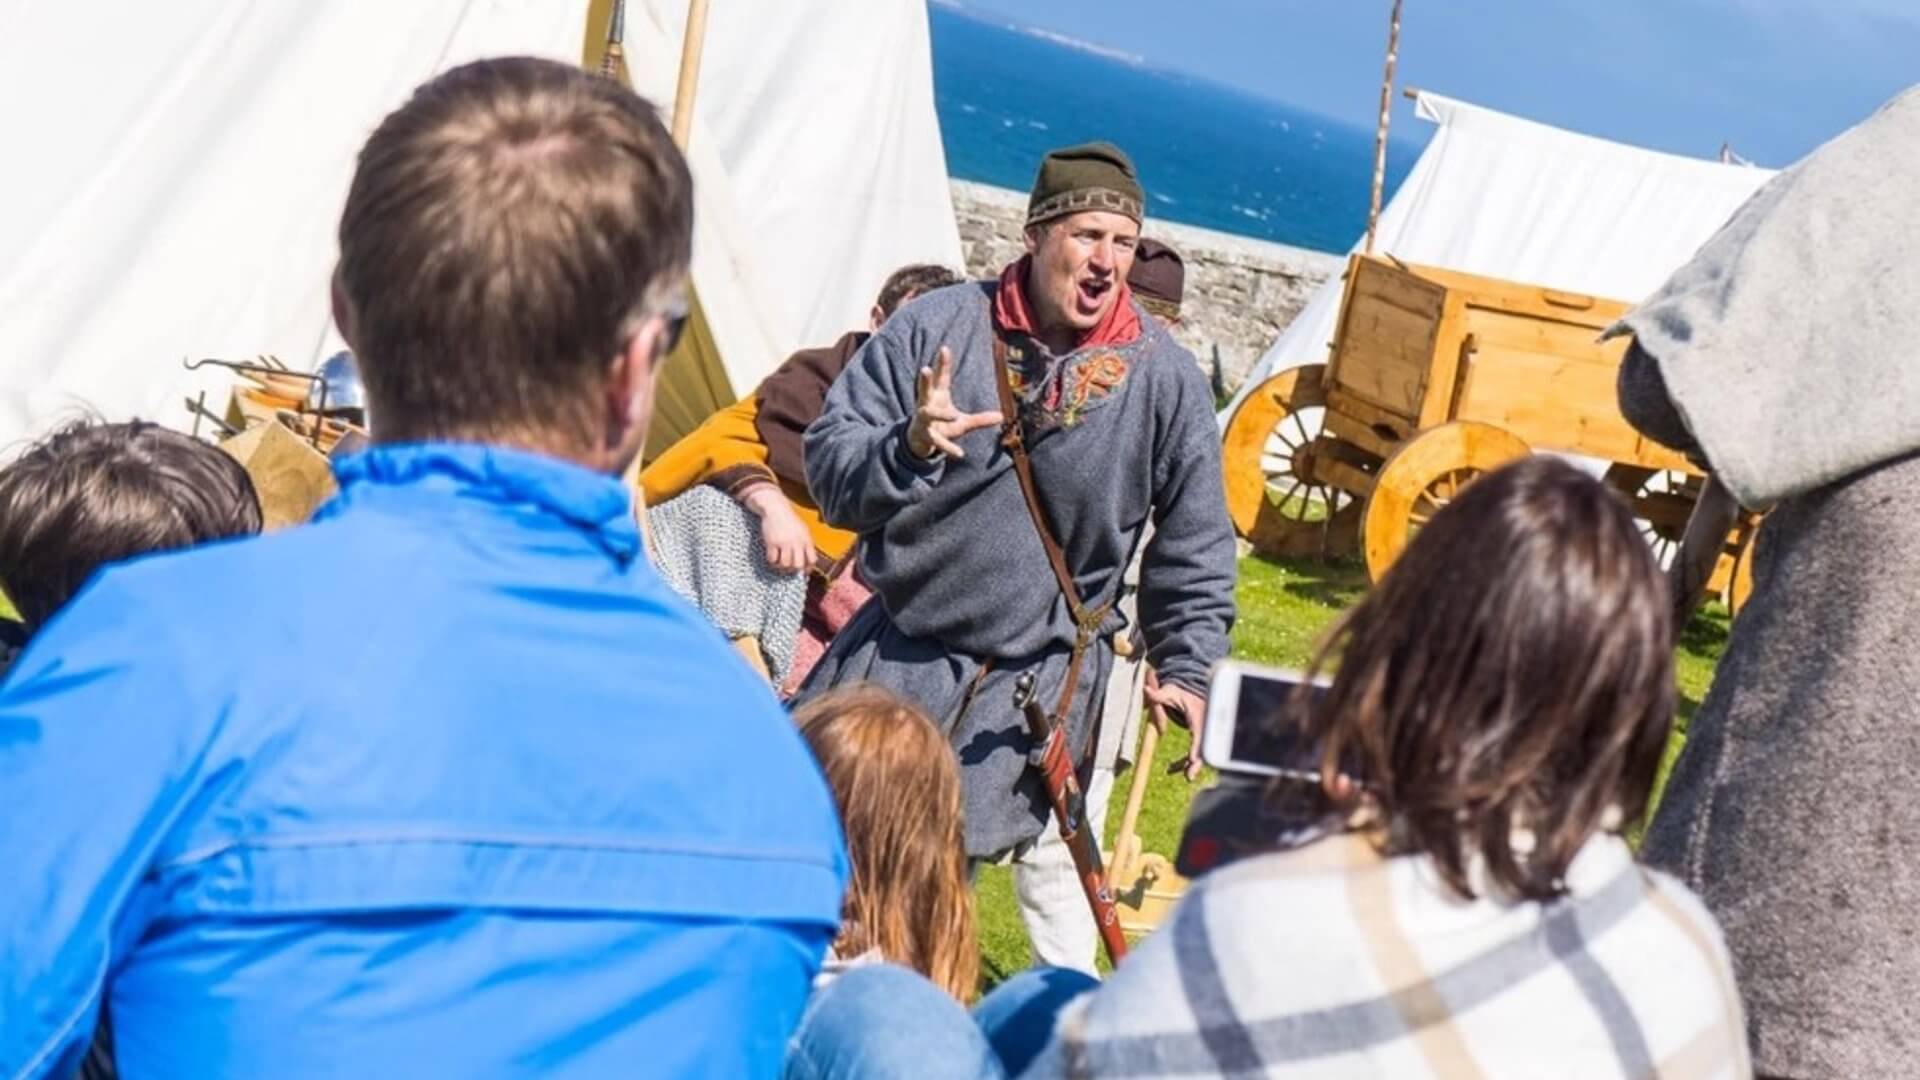 Acle Re-enactments: History Brought to Life